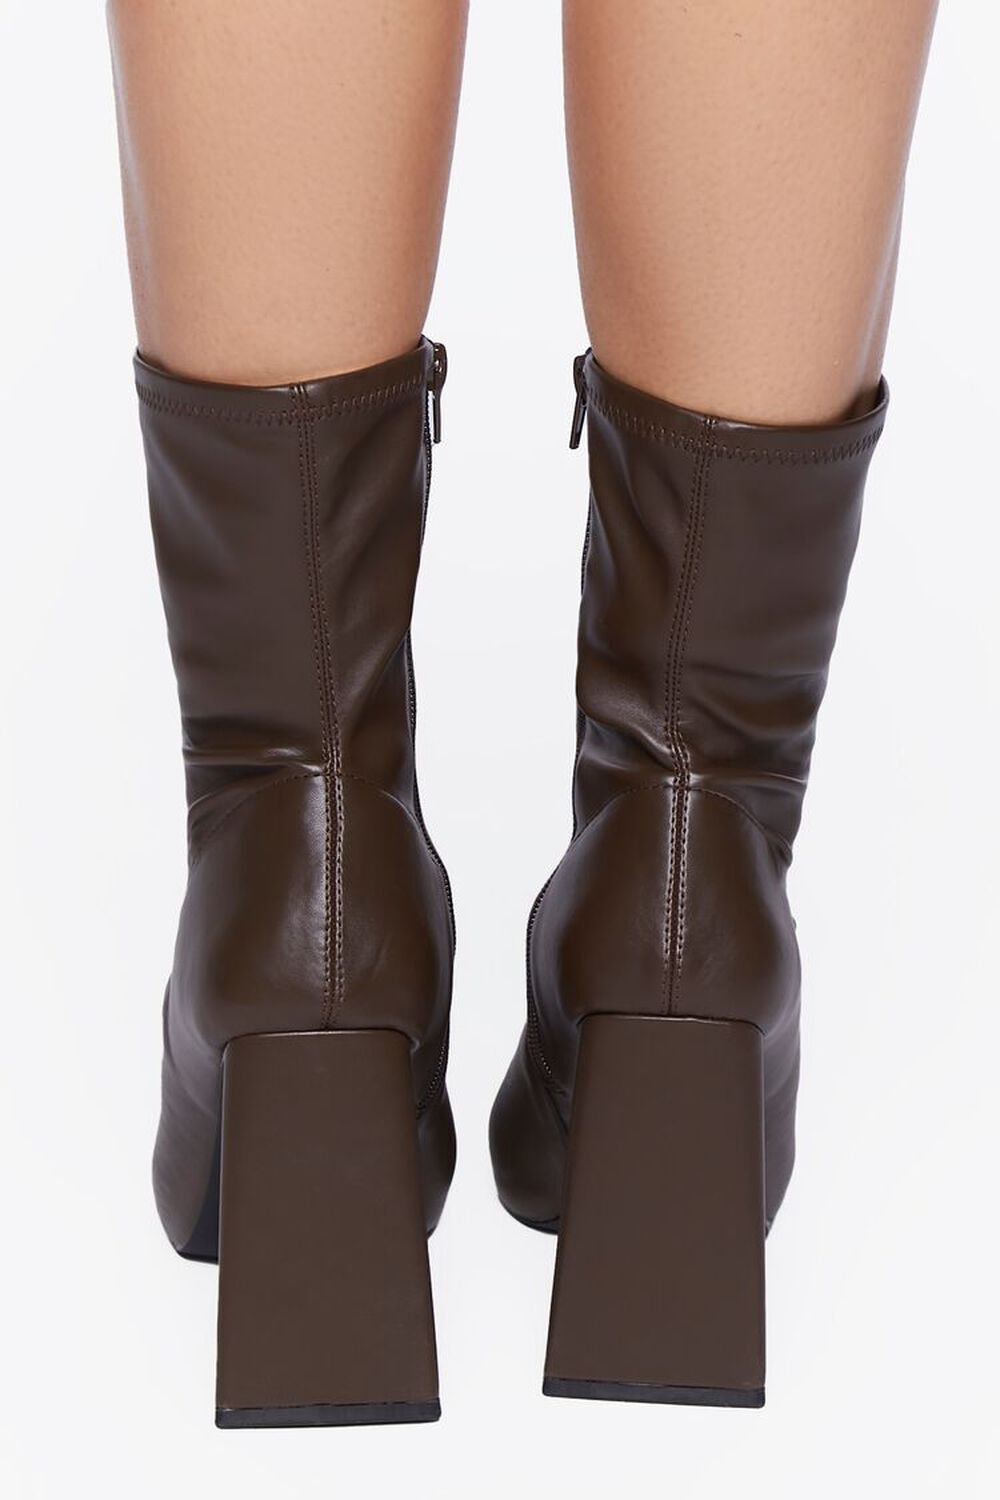 BROWN Faux Leather Pointed Booties, image 3